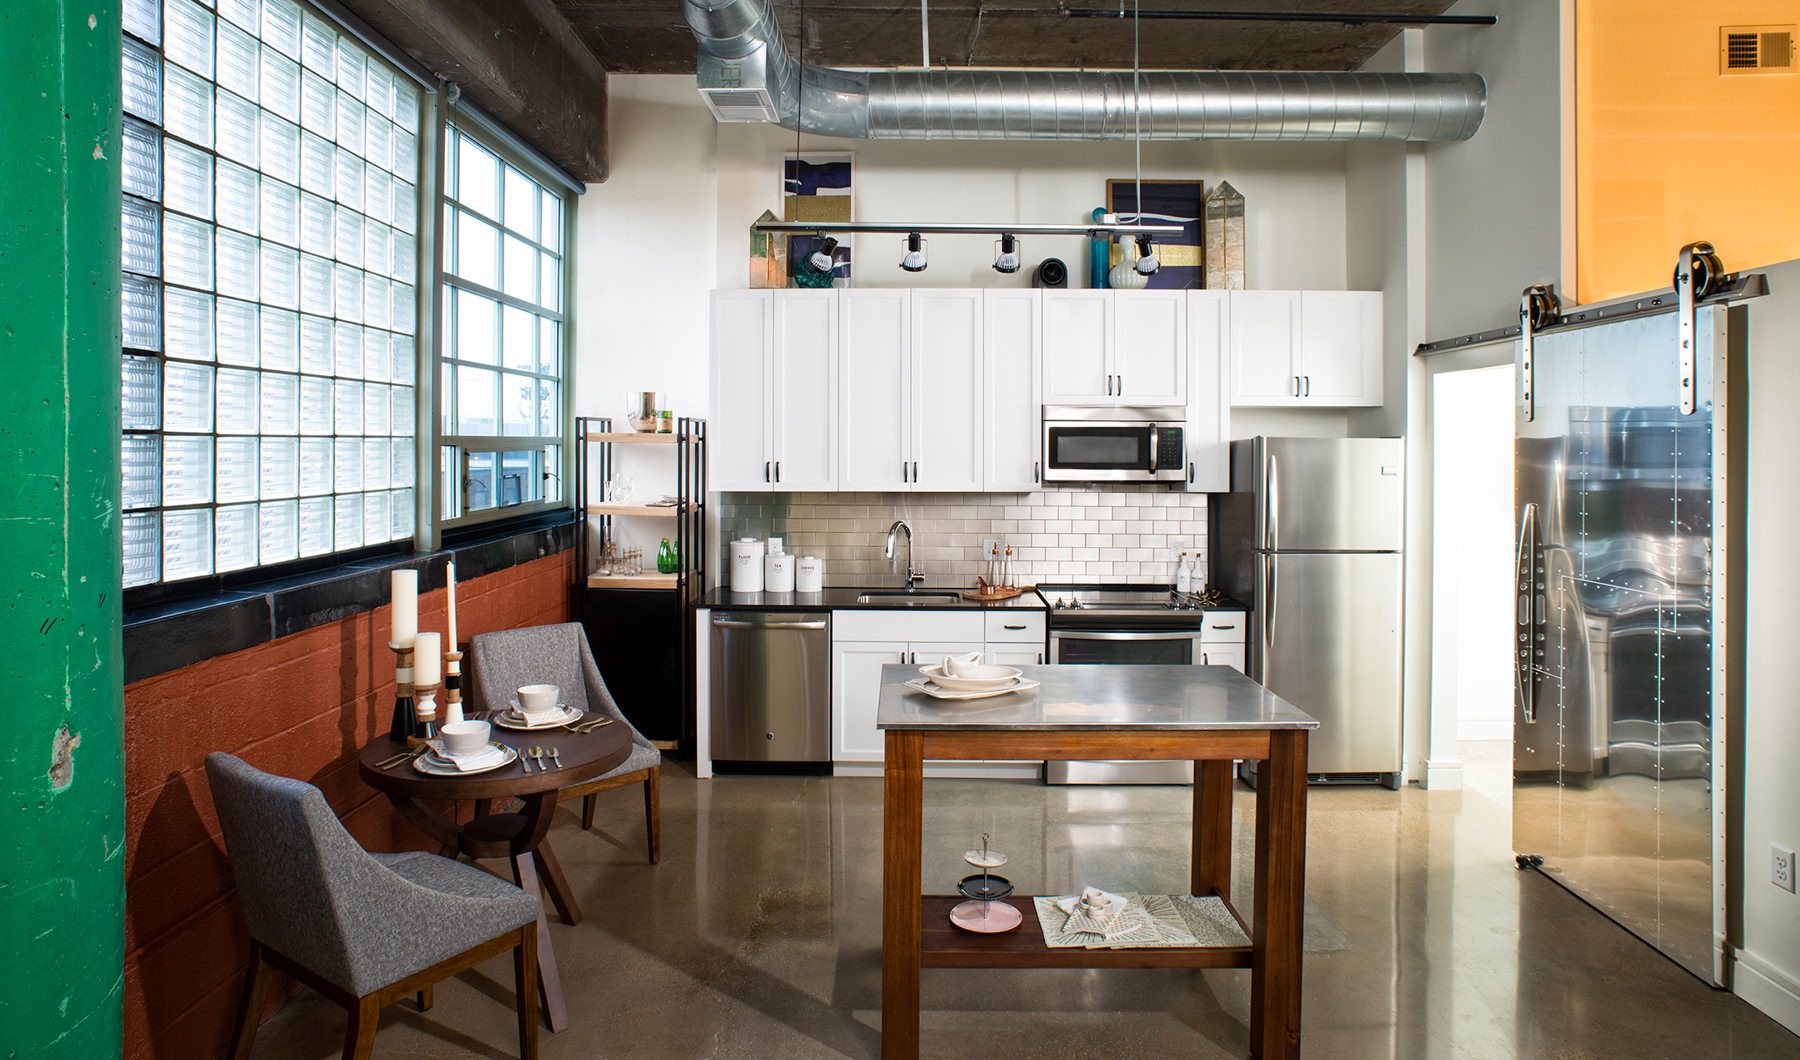 Hecht Warehouse at Ivy City is a pet-friendly apartment community